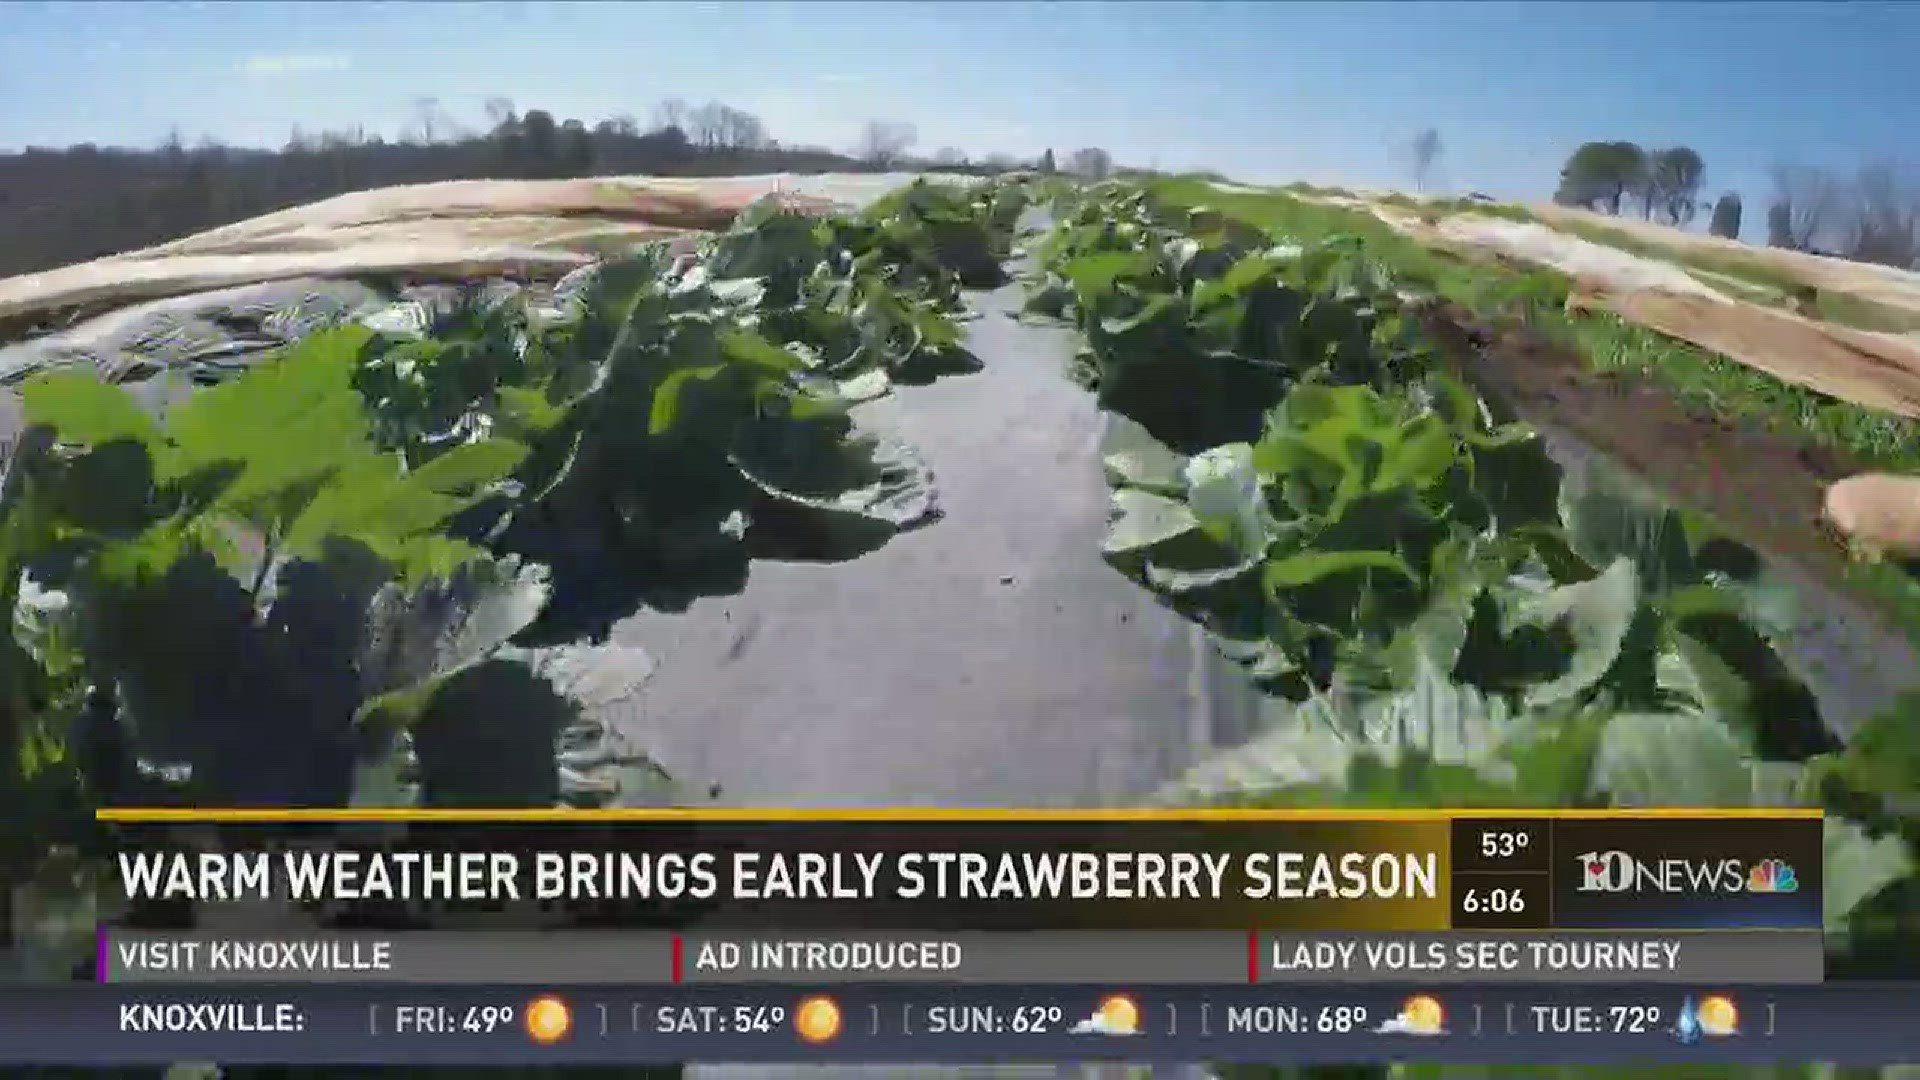 March 2, 2017: Recent warm weather is bringing an early start to the strawberry growing season statewide. But below-freezing temperatures are coming, which could be disastrous for those early berries.